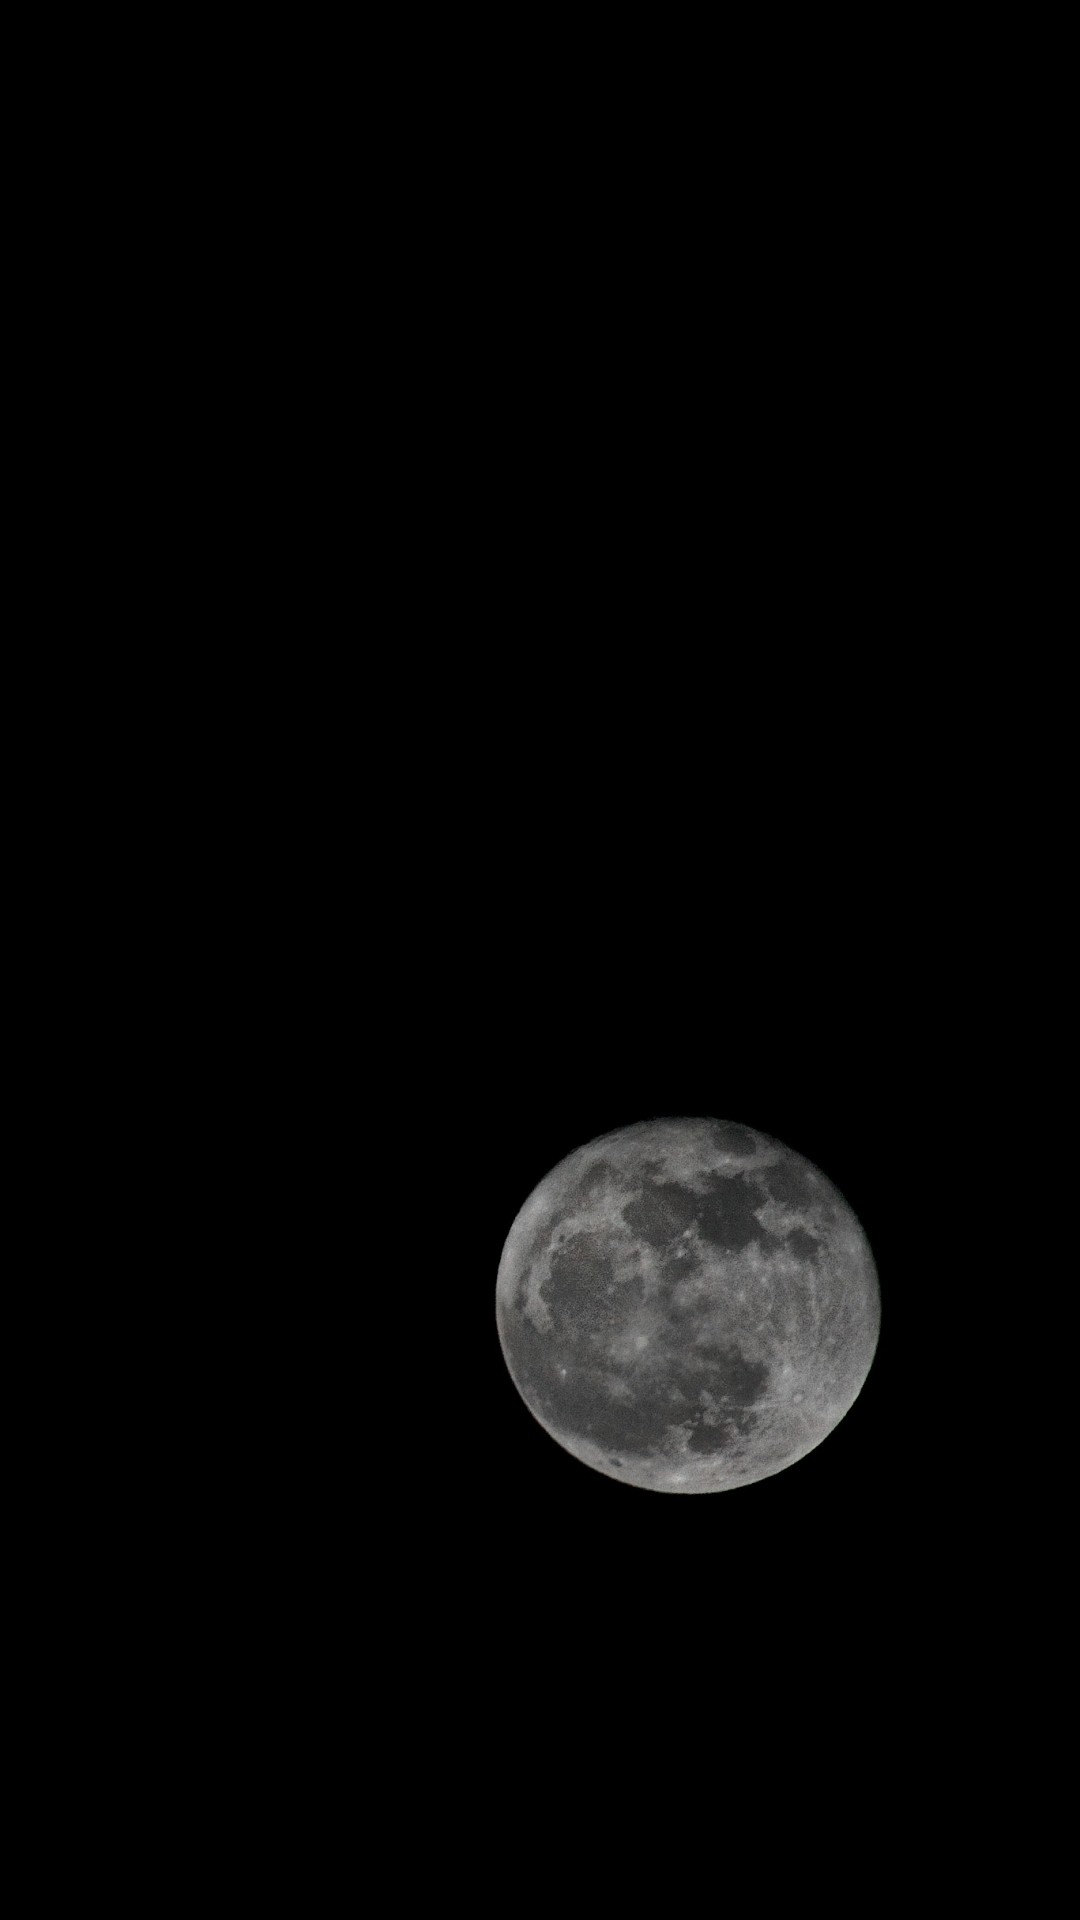 Moon wallpaper for android